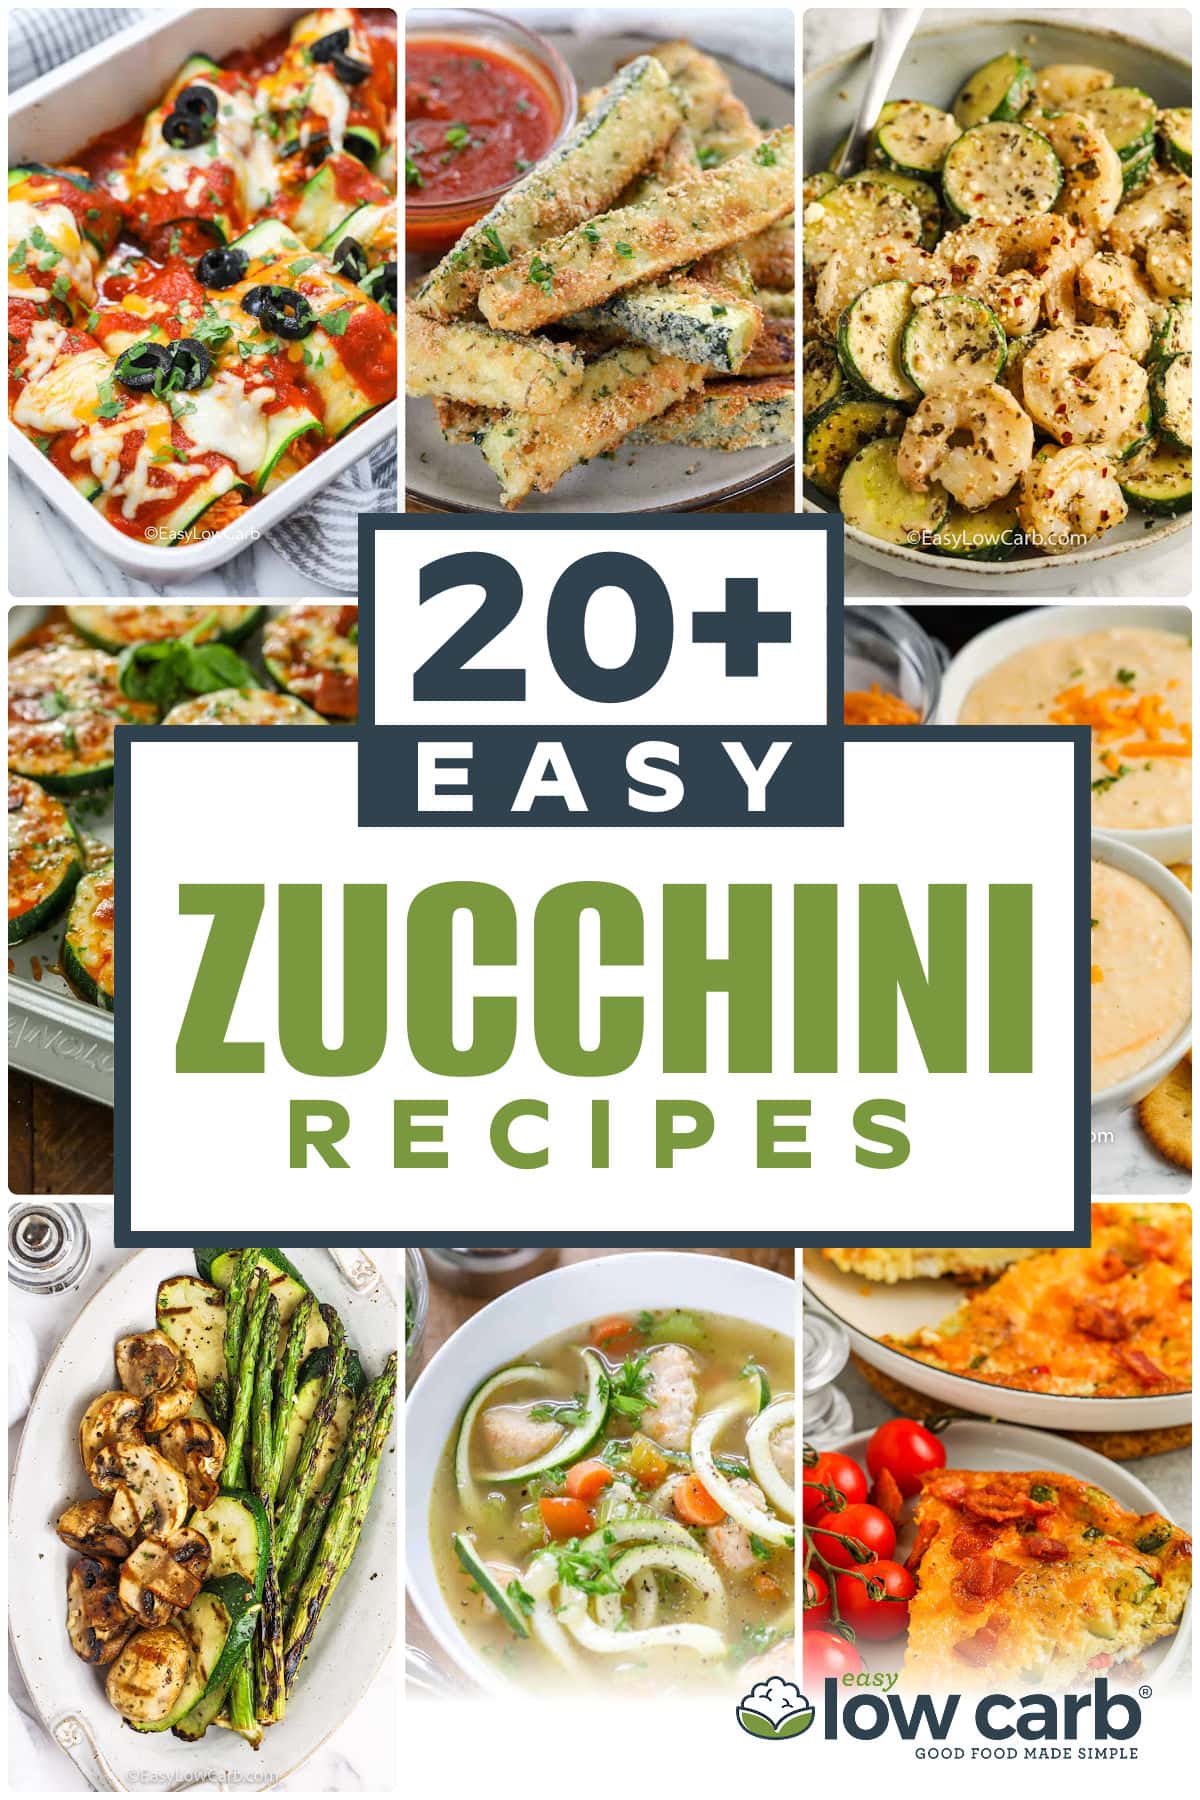 photos of Easy Zucchini Recipes with writing